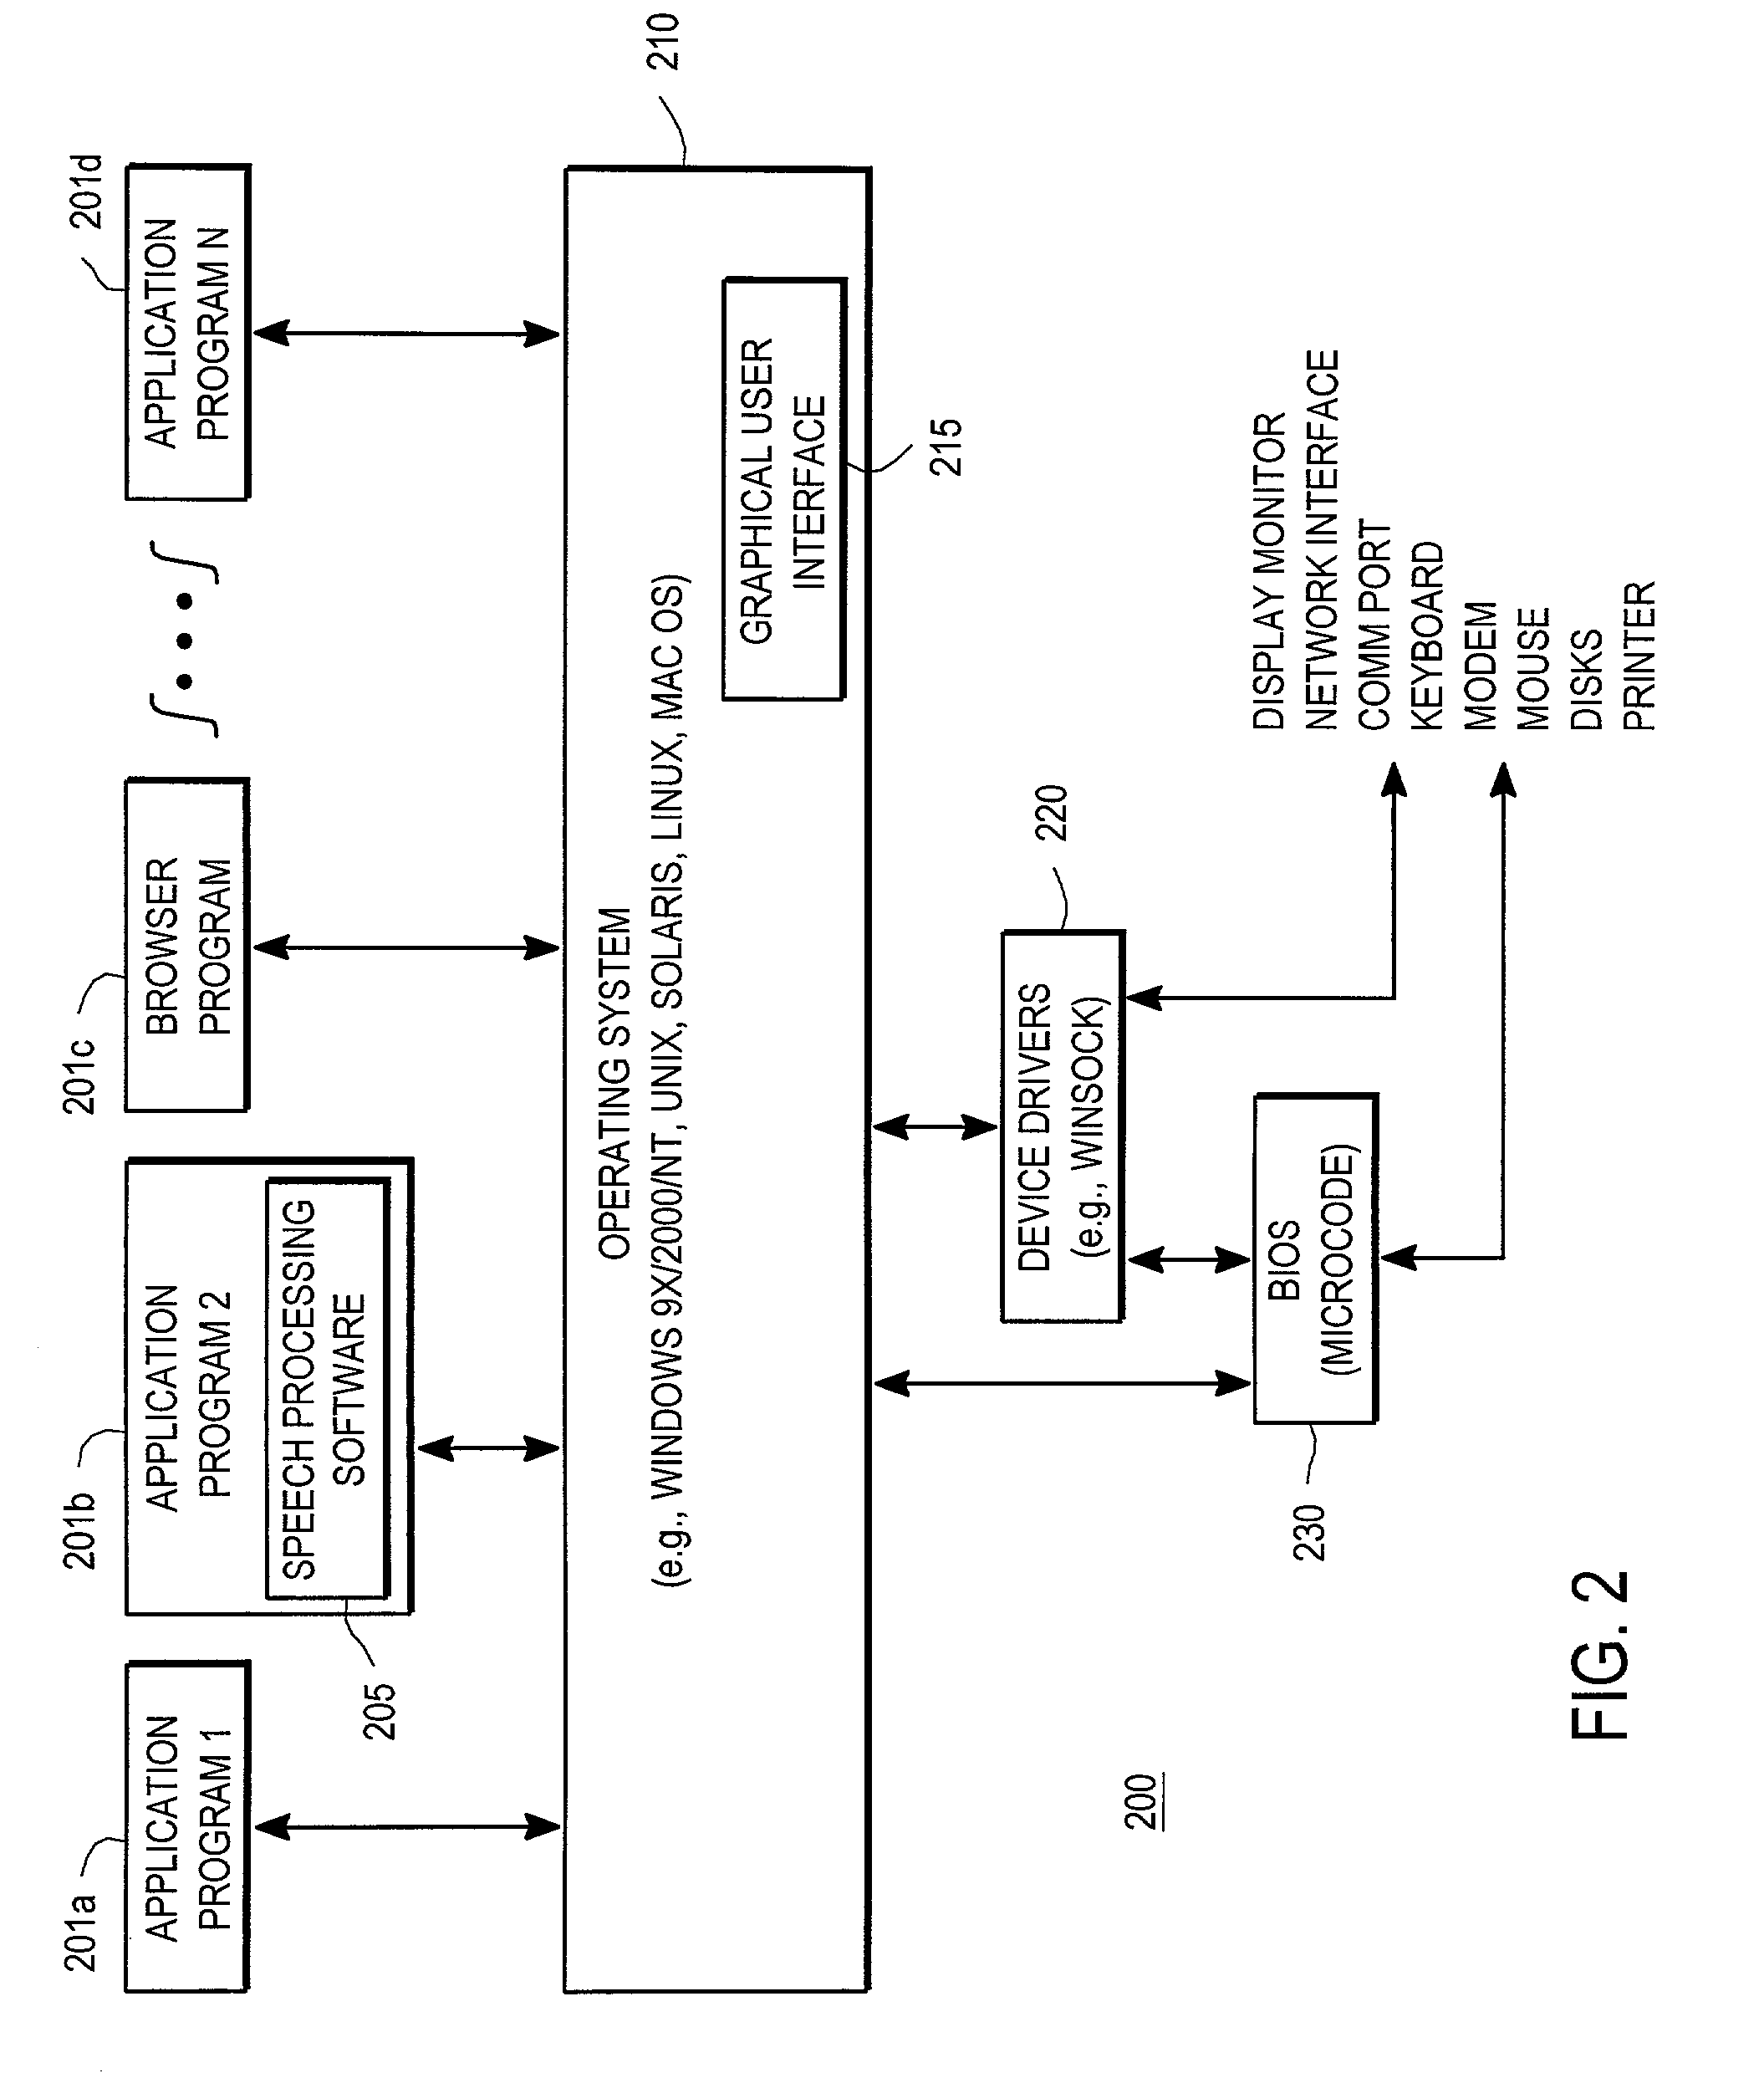 System and method for context-based spontaneous speech recognition